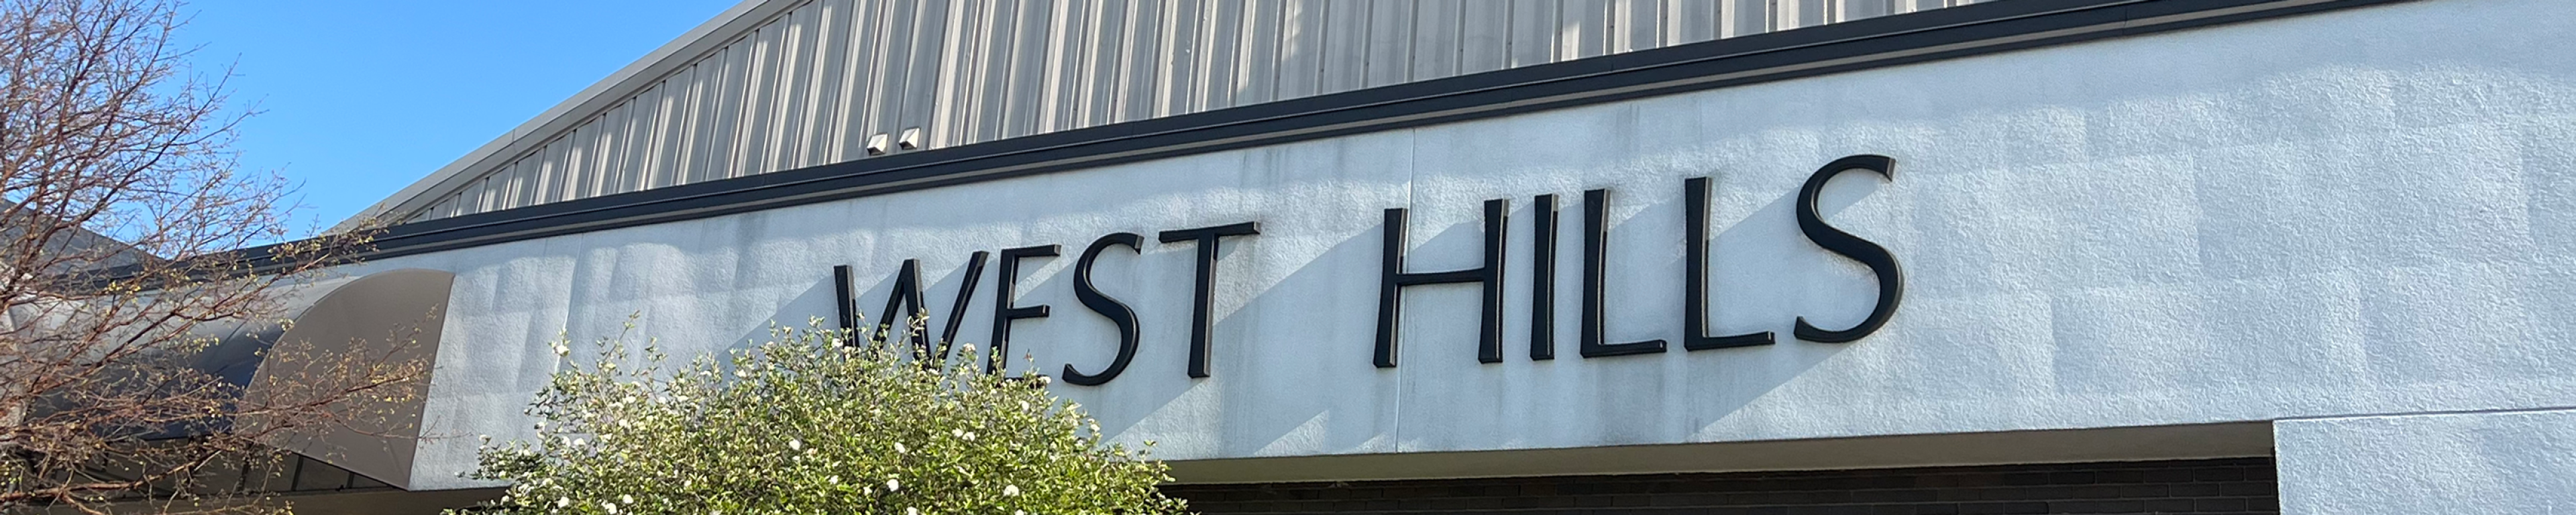 Close up of the West Hills sign on the building